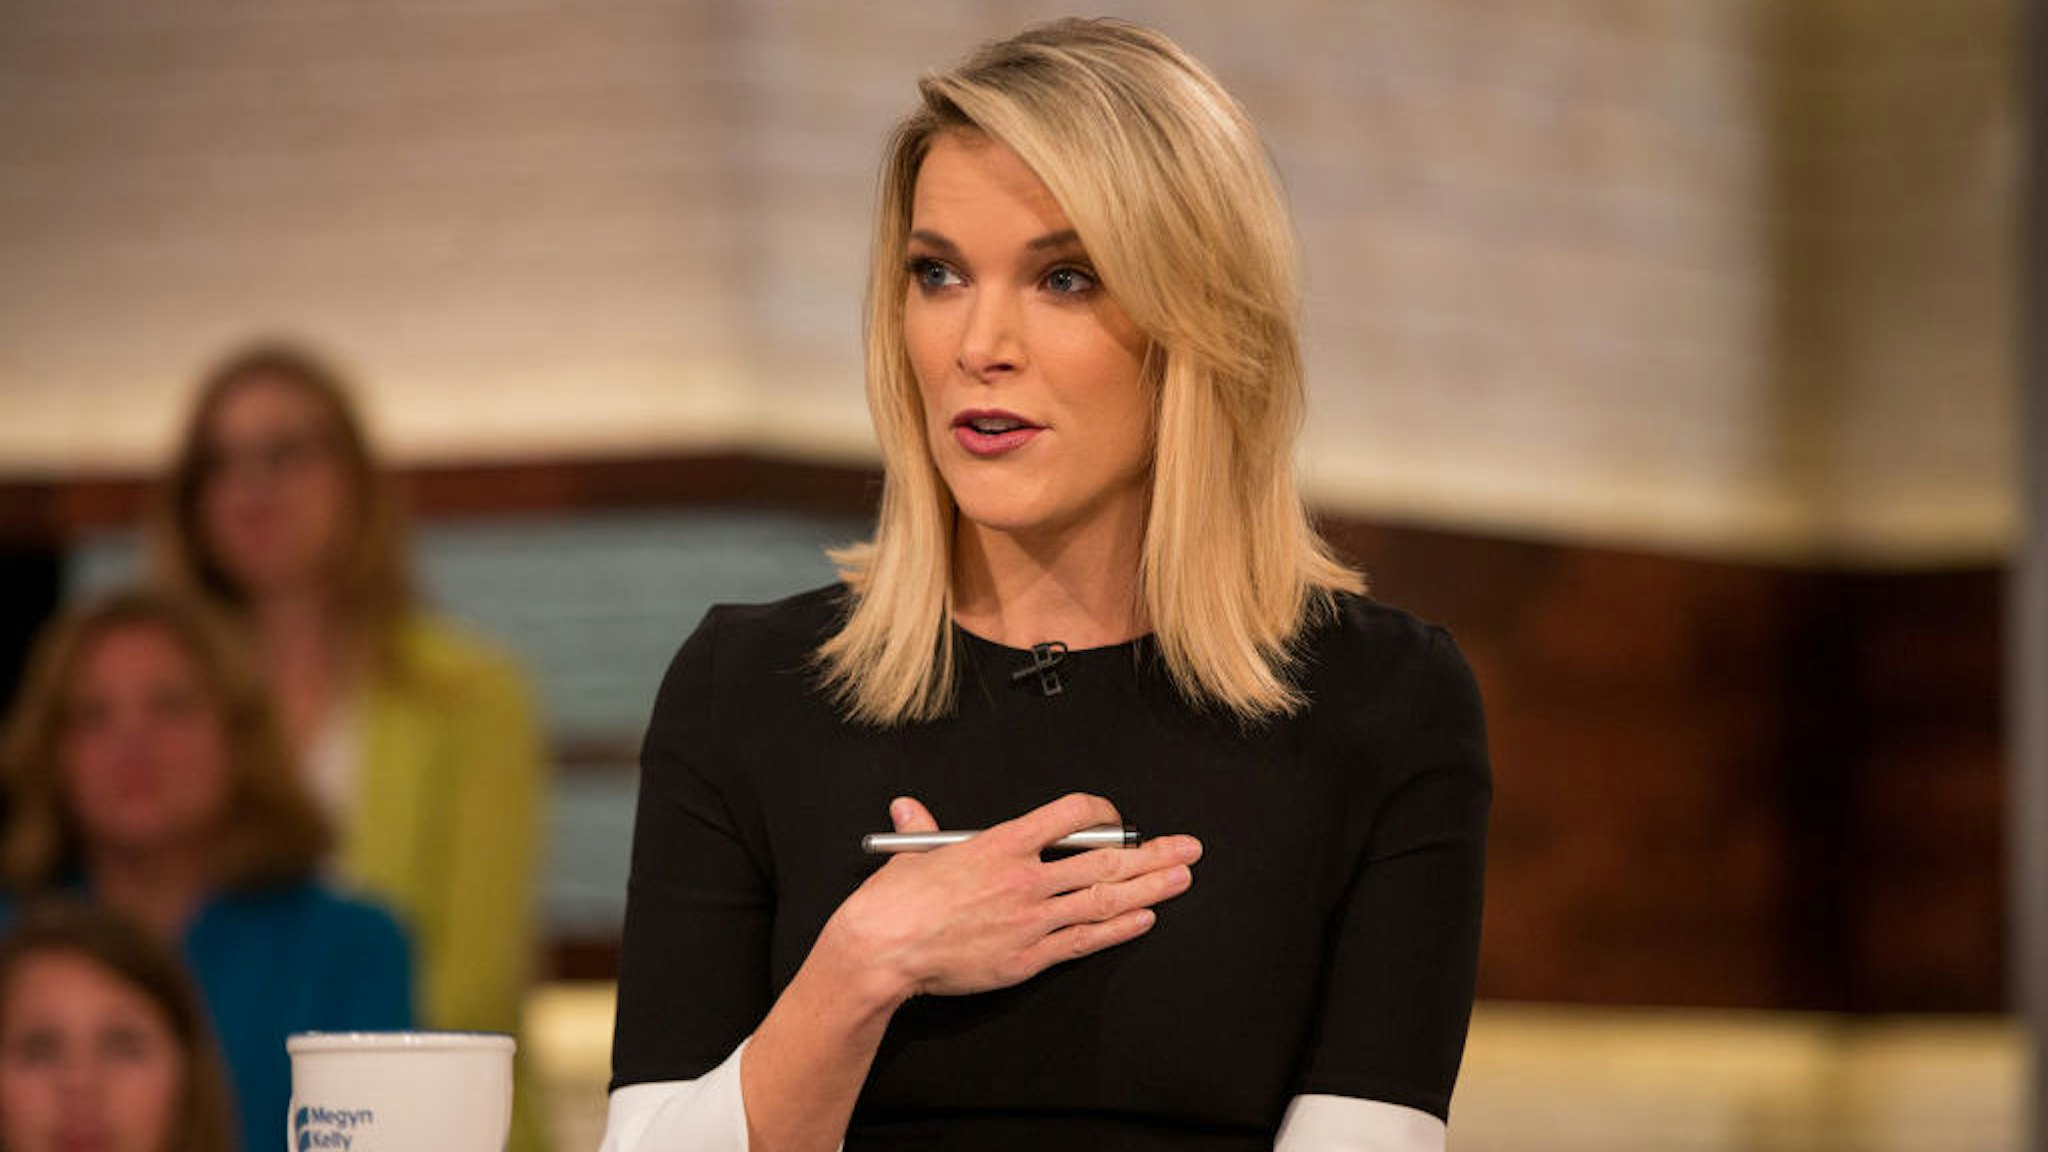 MEGYN KELLY TODAY -- Pictured: Megyn Kelly on Wednesday, August 22, 2018 -- (Photo by: Nathan Congleton/NBC/NBCU Photo Bank)